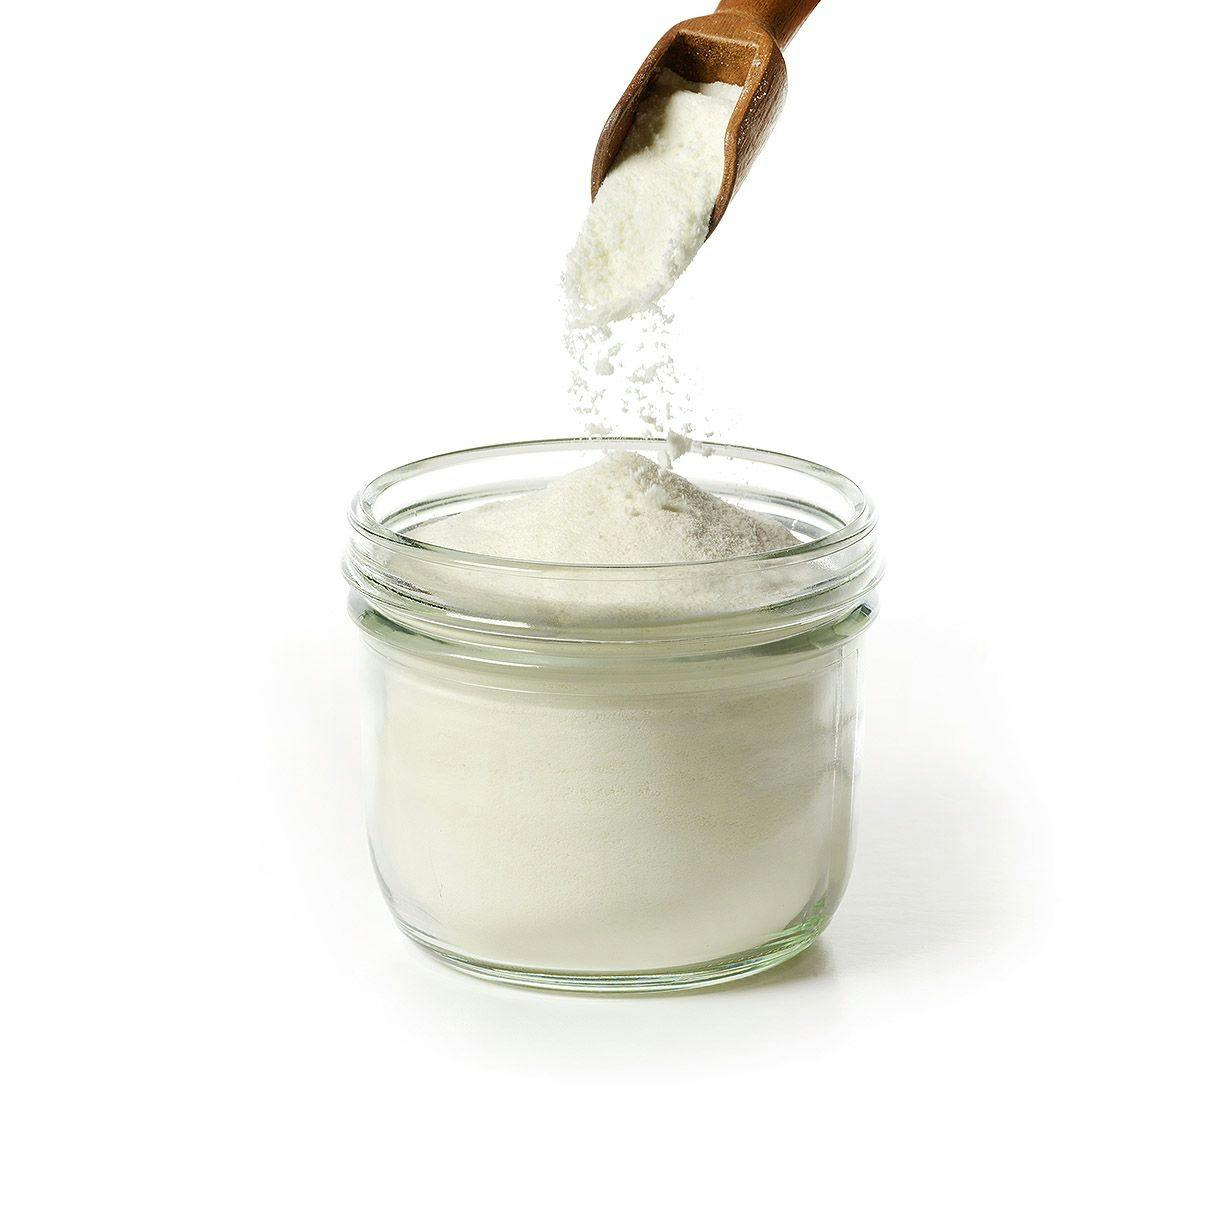 Glass jar filled with white powder. Wooden spoon above jar pours white powder into jar.